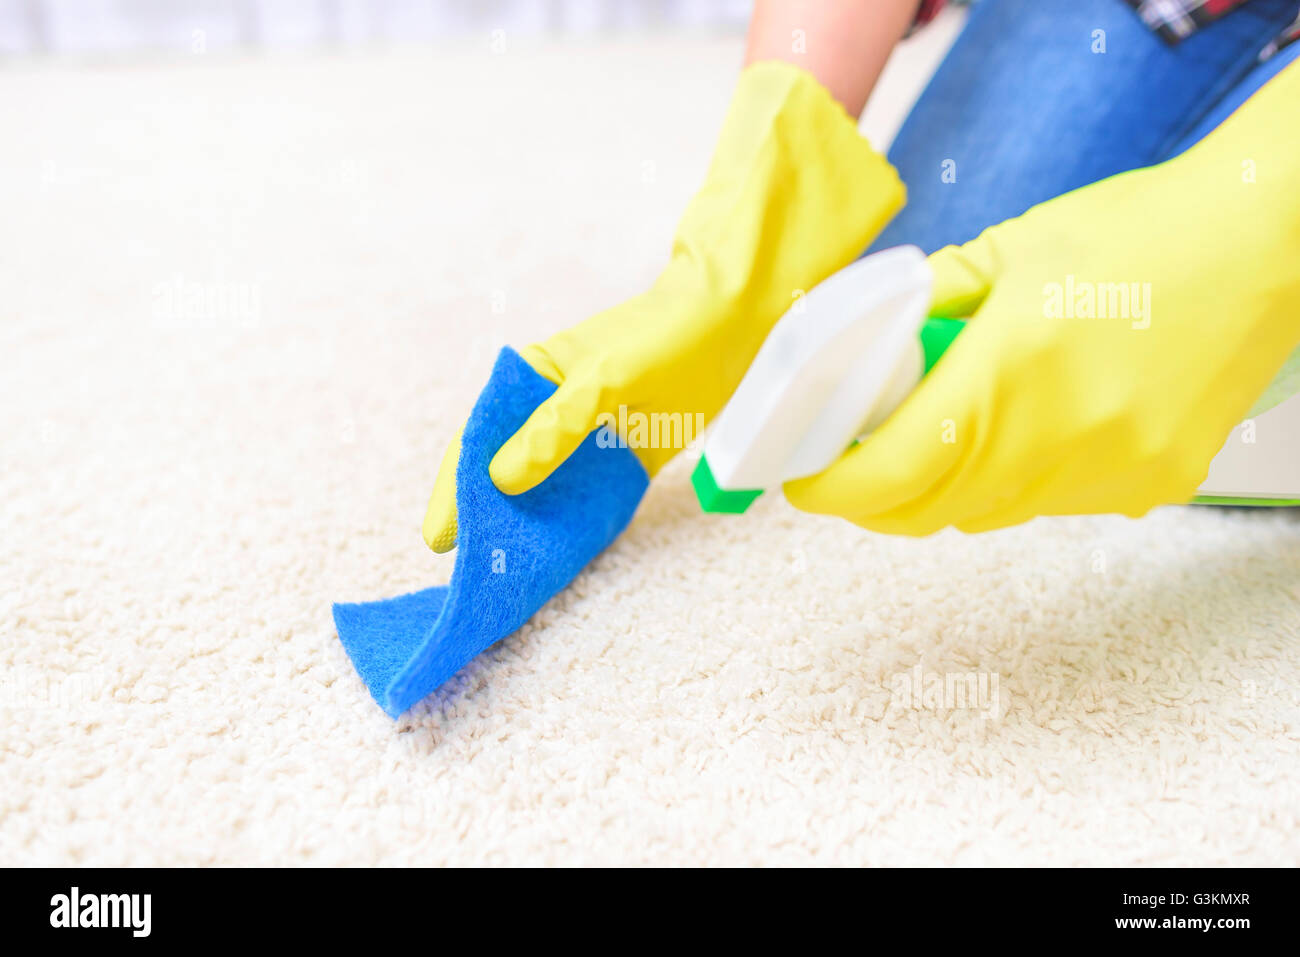 Carpet Cleaning spray. Close-up. Focus on a washcloth and carpet. Stock Photo